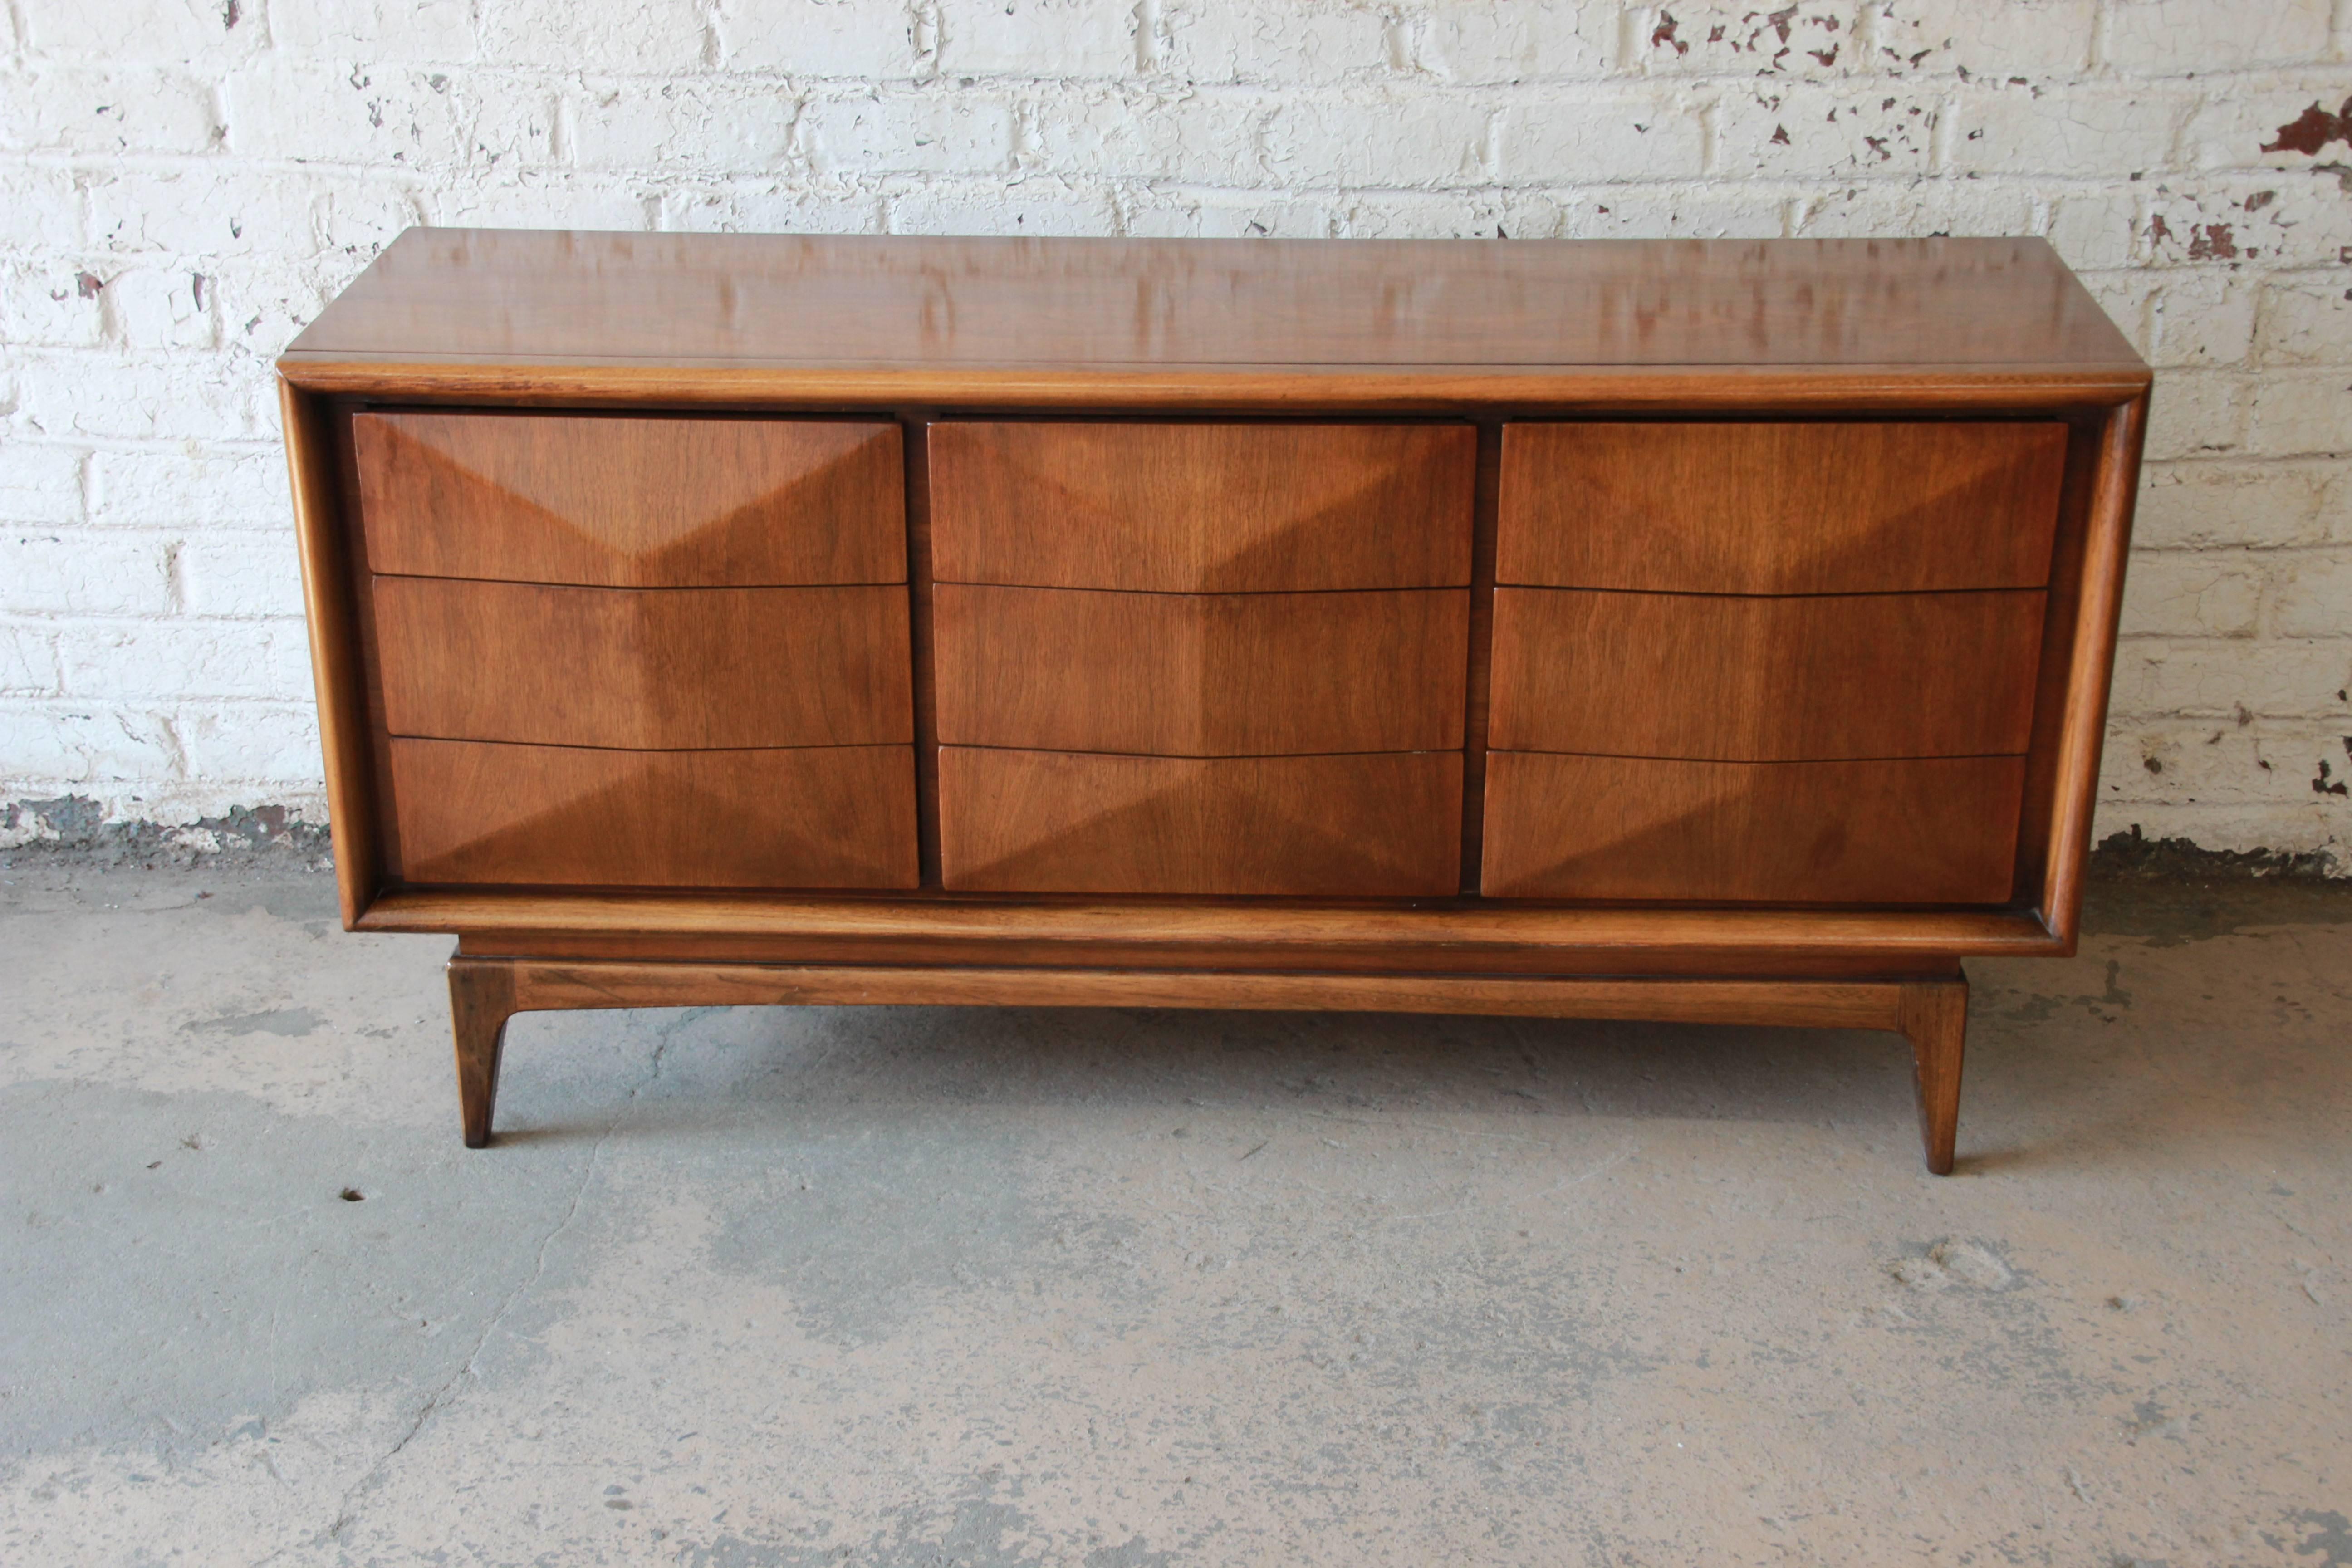 An exceptional and unique Mid-Century Modern diamond front dresser or credenza by United Furniture in the style of Vladimir Kagan. The dresser features stunning walnut wood grain and a sculpted diamond front with nine hefty drawers. It is well